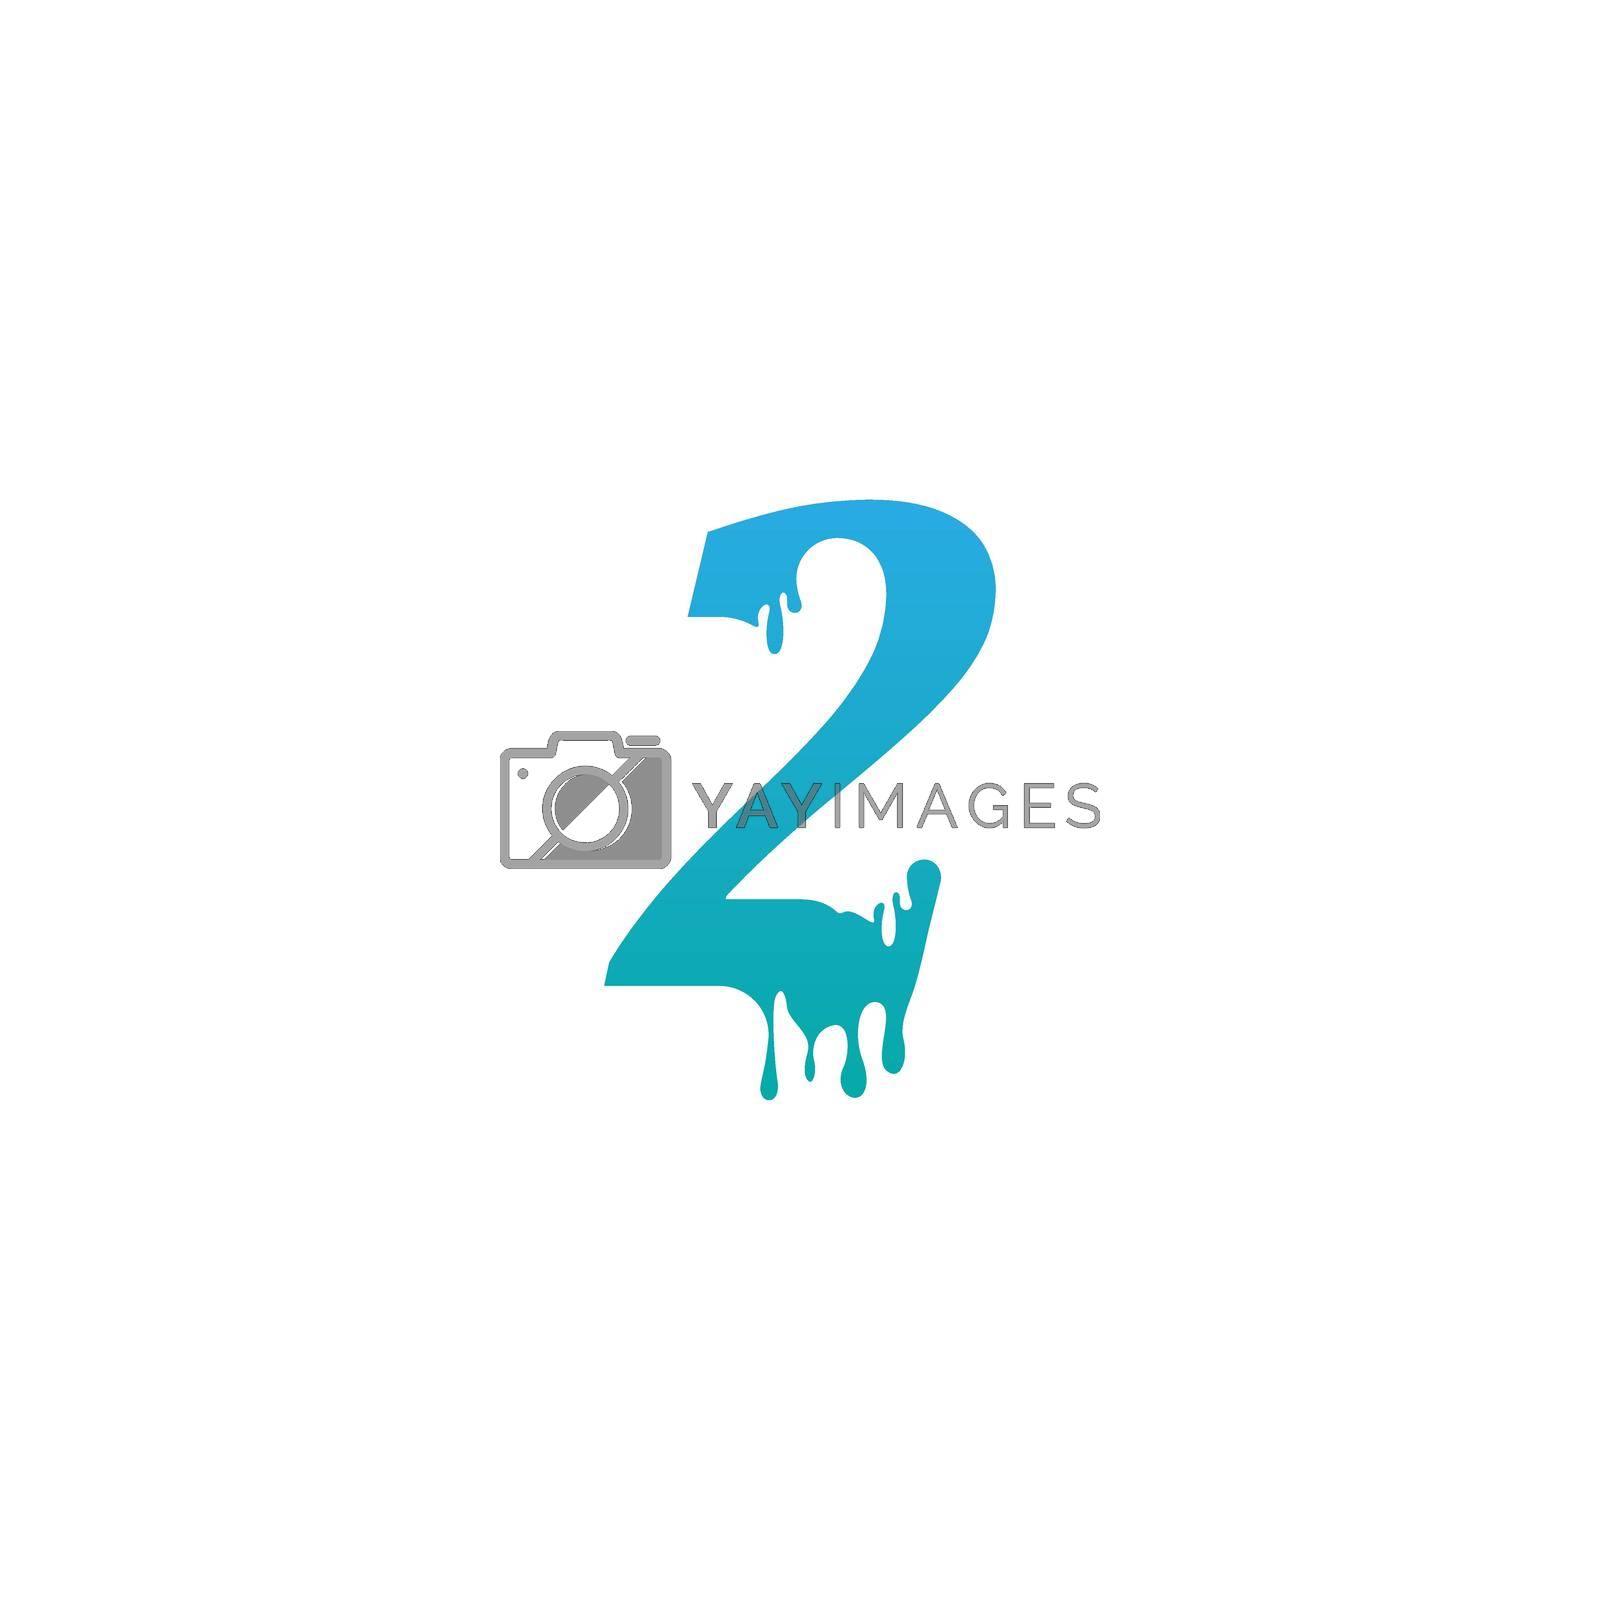 Royalty free image of Melting Number 2 icon logo design template by bellaxbudhong3